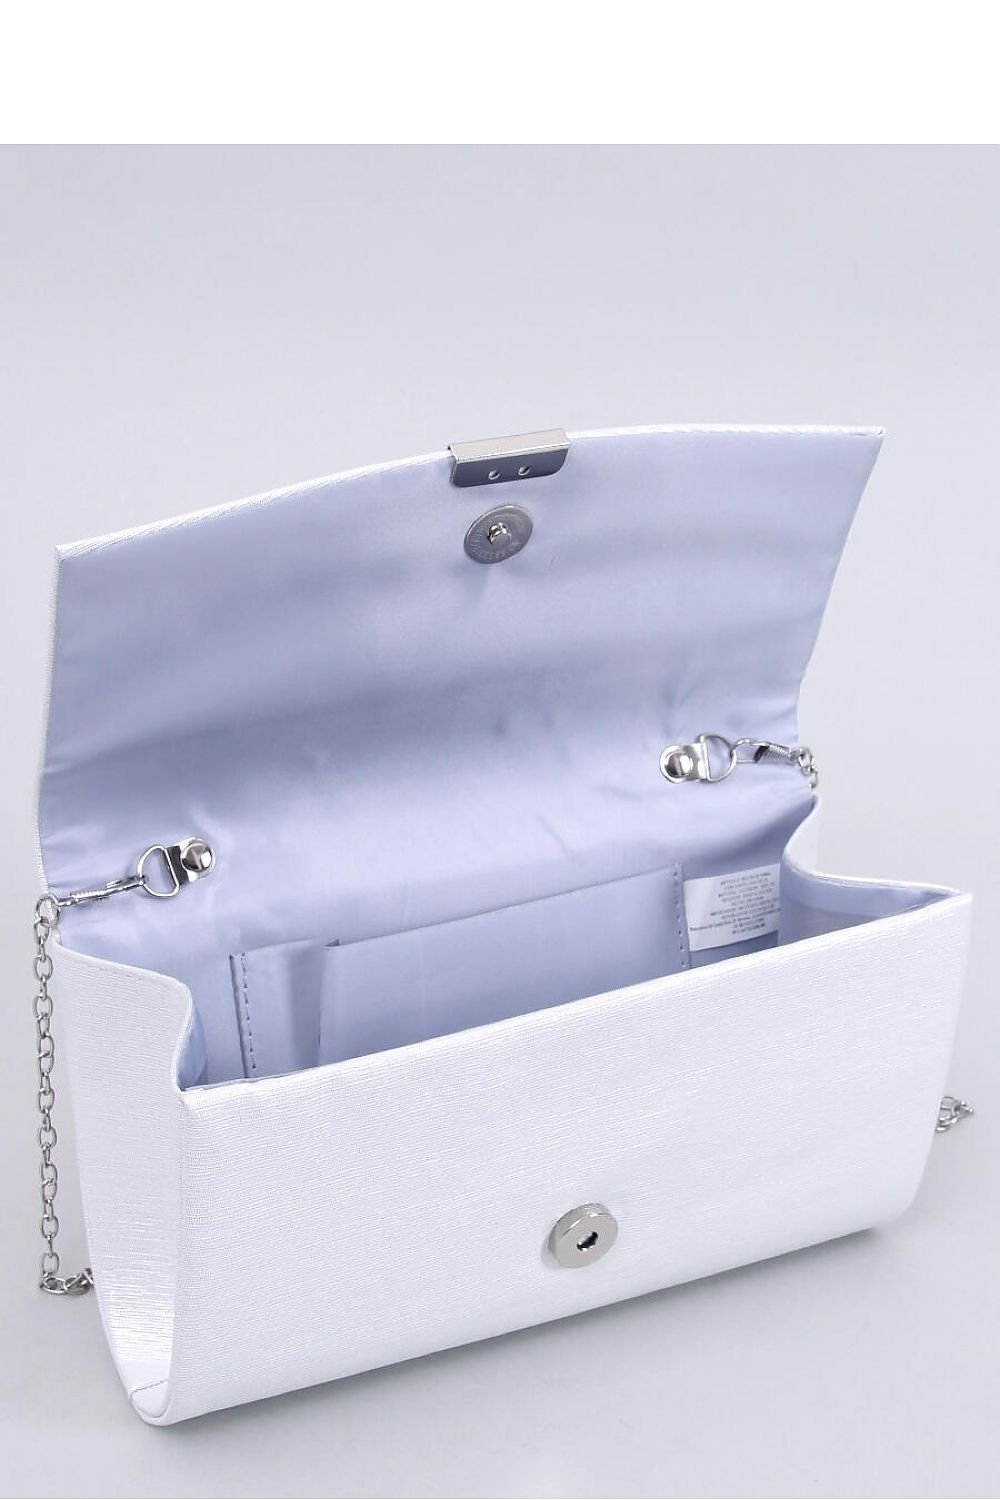 Envelope clutch bag - M&H FashionEnvelope clutch bagM&H FashionM&H Fashion189624_1103882one-size-fits-allEnvelope clutch bag InelloM&H FashionM&H FashionIridescent clutch bag for women. It can be worn in two ways ? classically in hand or on a delicate silver chain. It fastens with a magnetic clasp, and inside there iEnvelope clutch bag